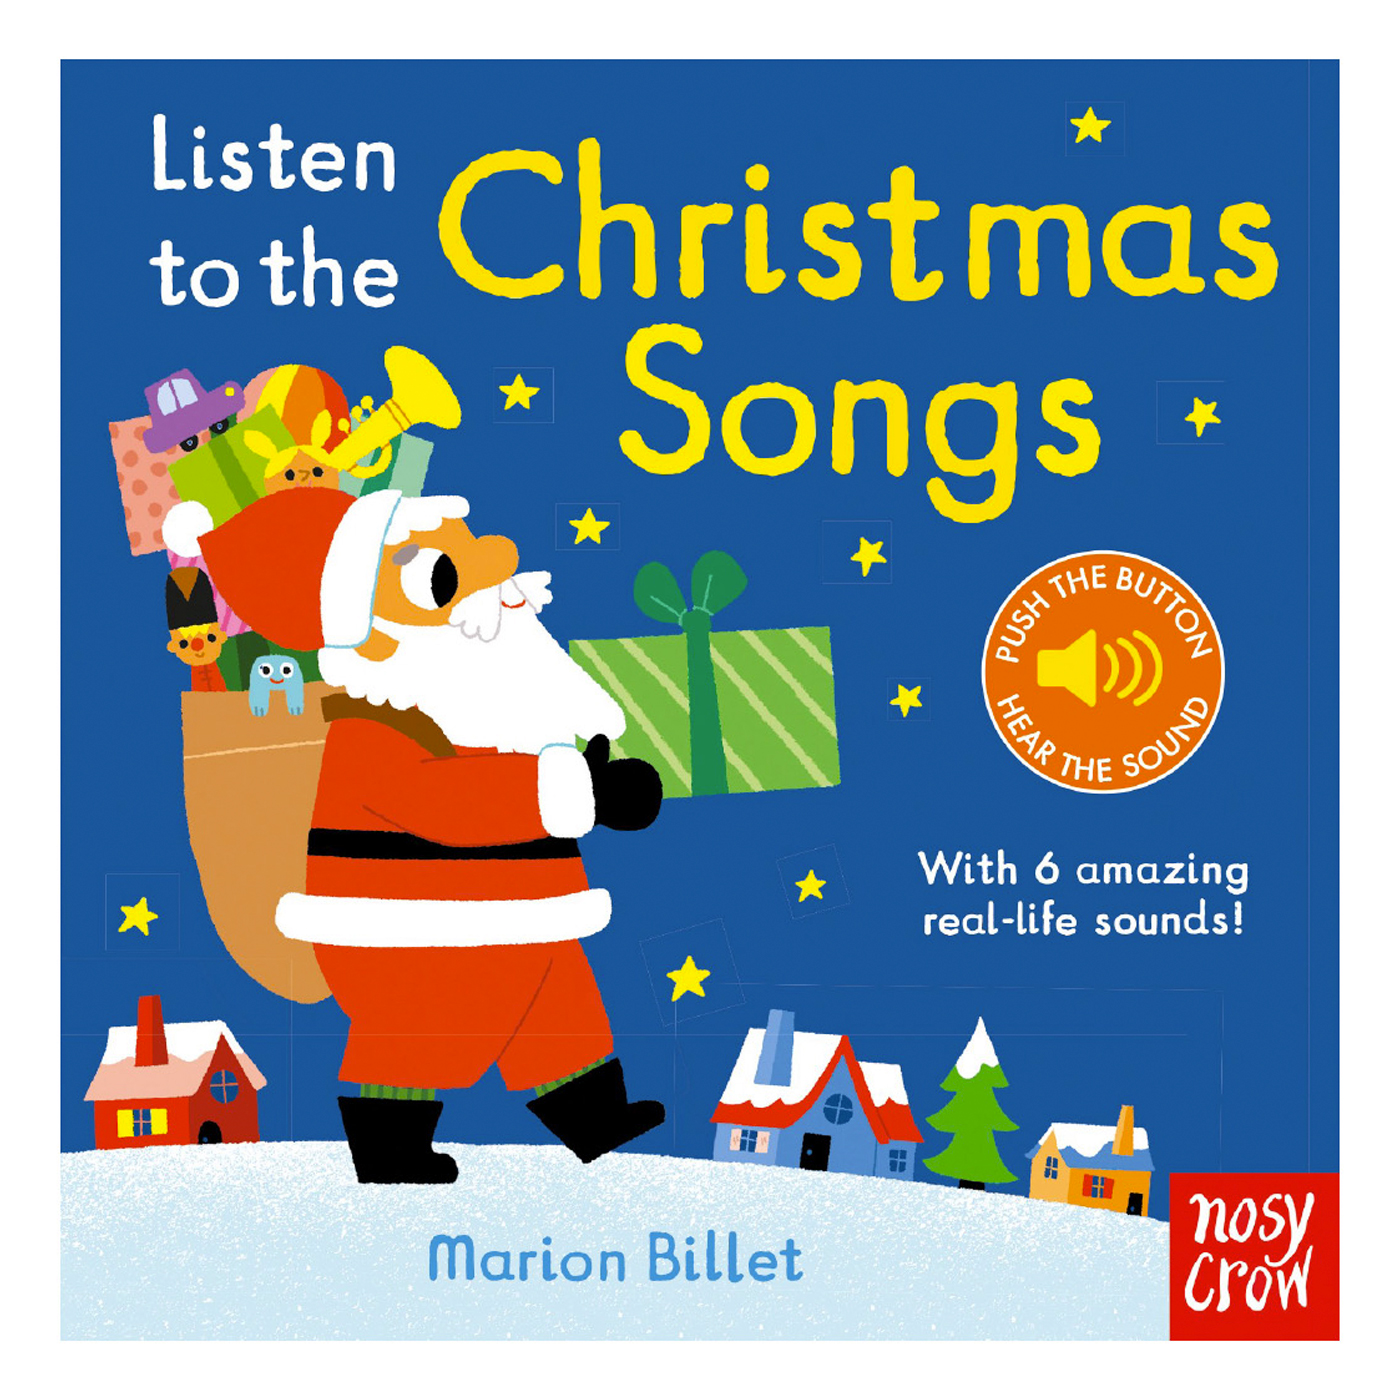  Listen to the: Christmas Songs